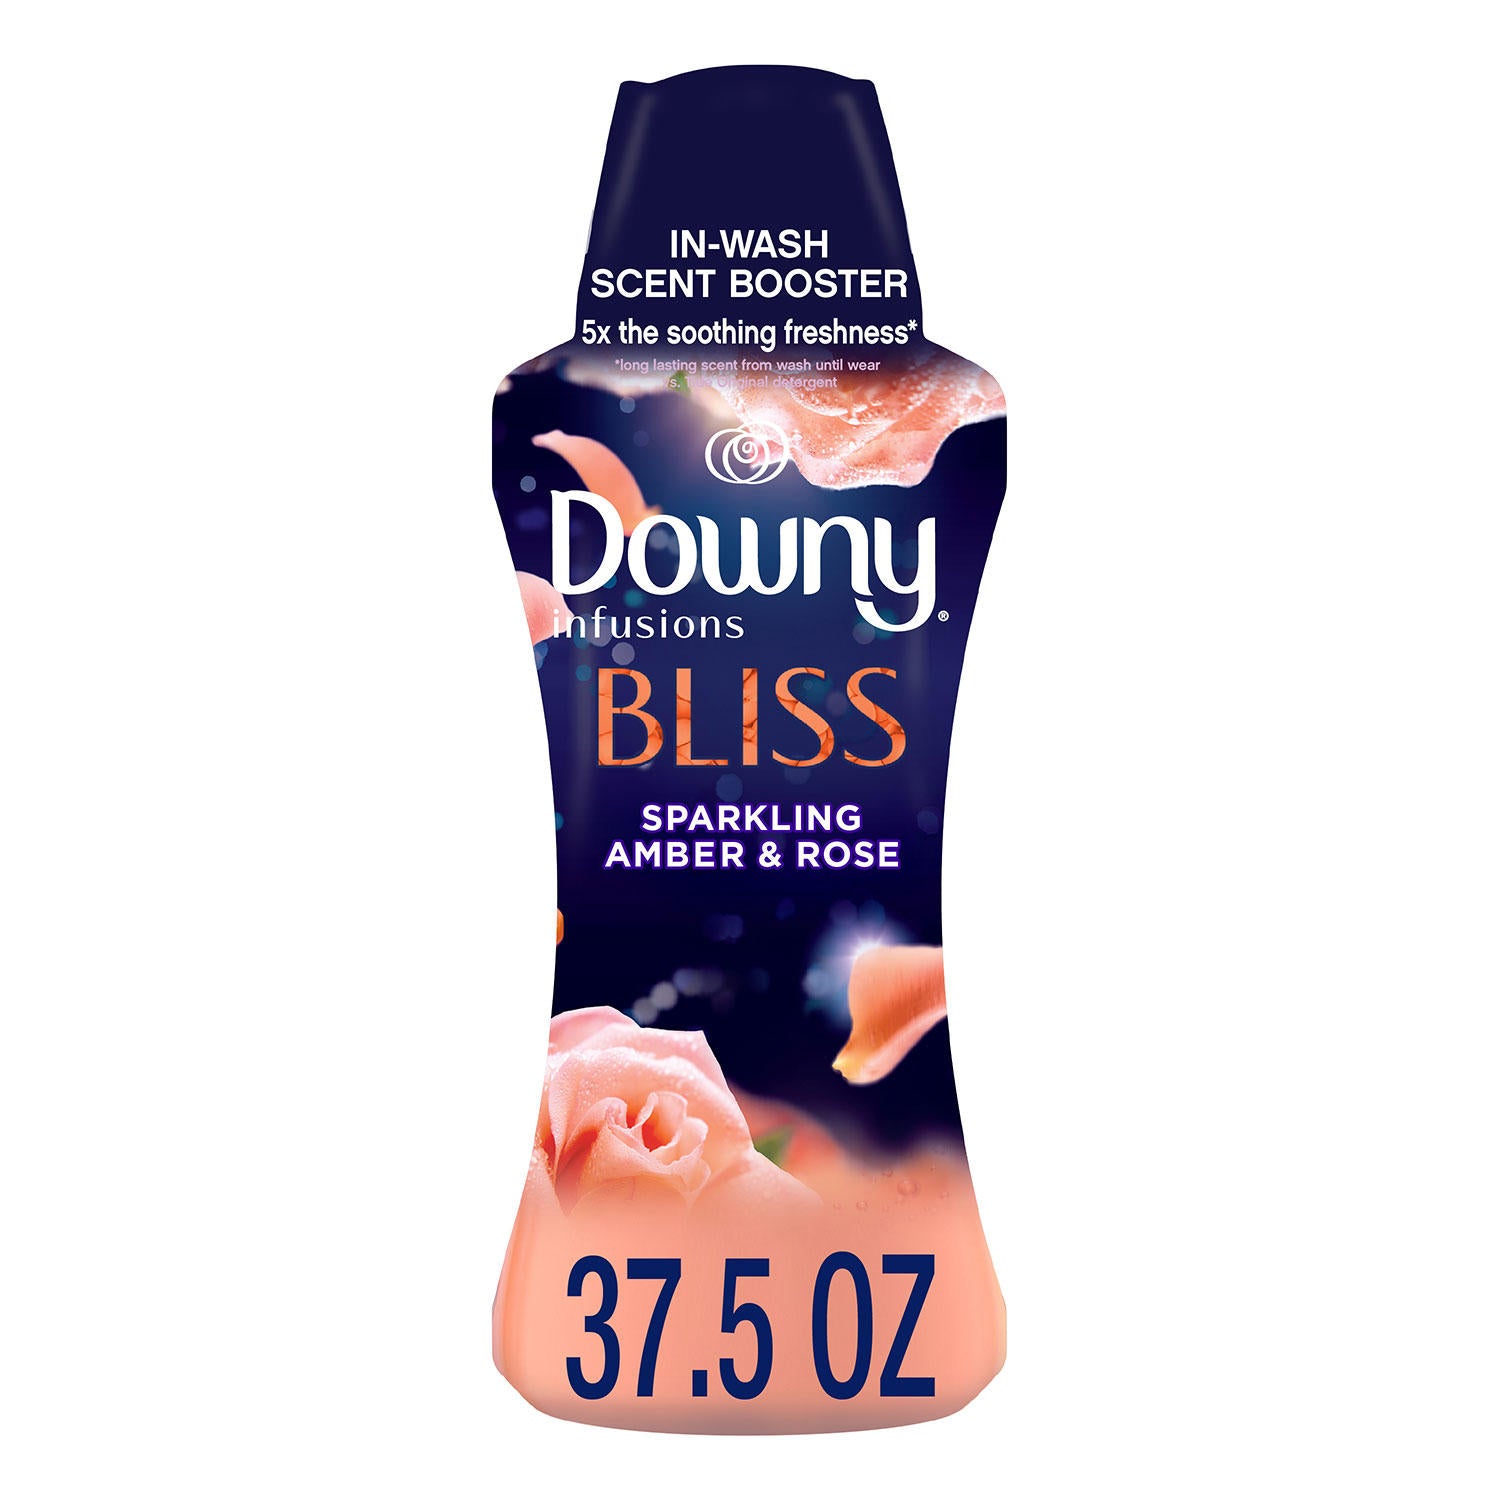 Downy beads editorial stock photo. Image of soap, house - 176957123